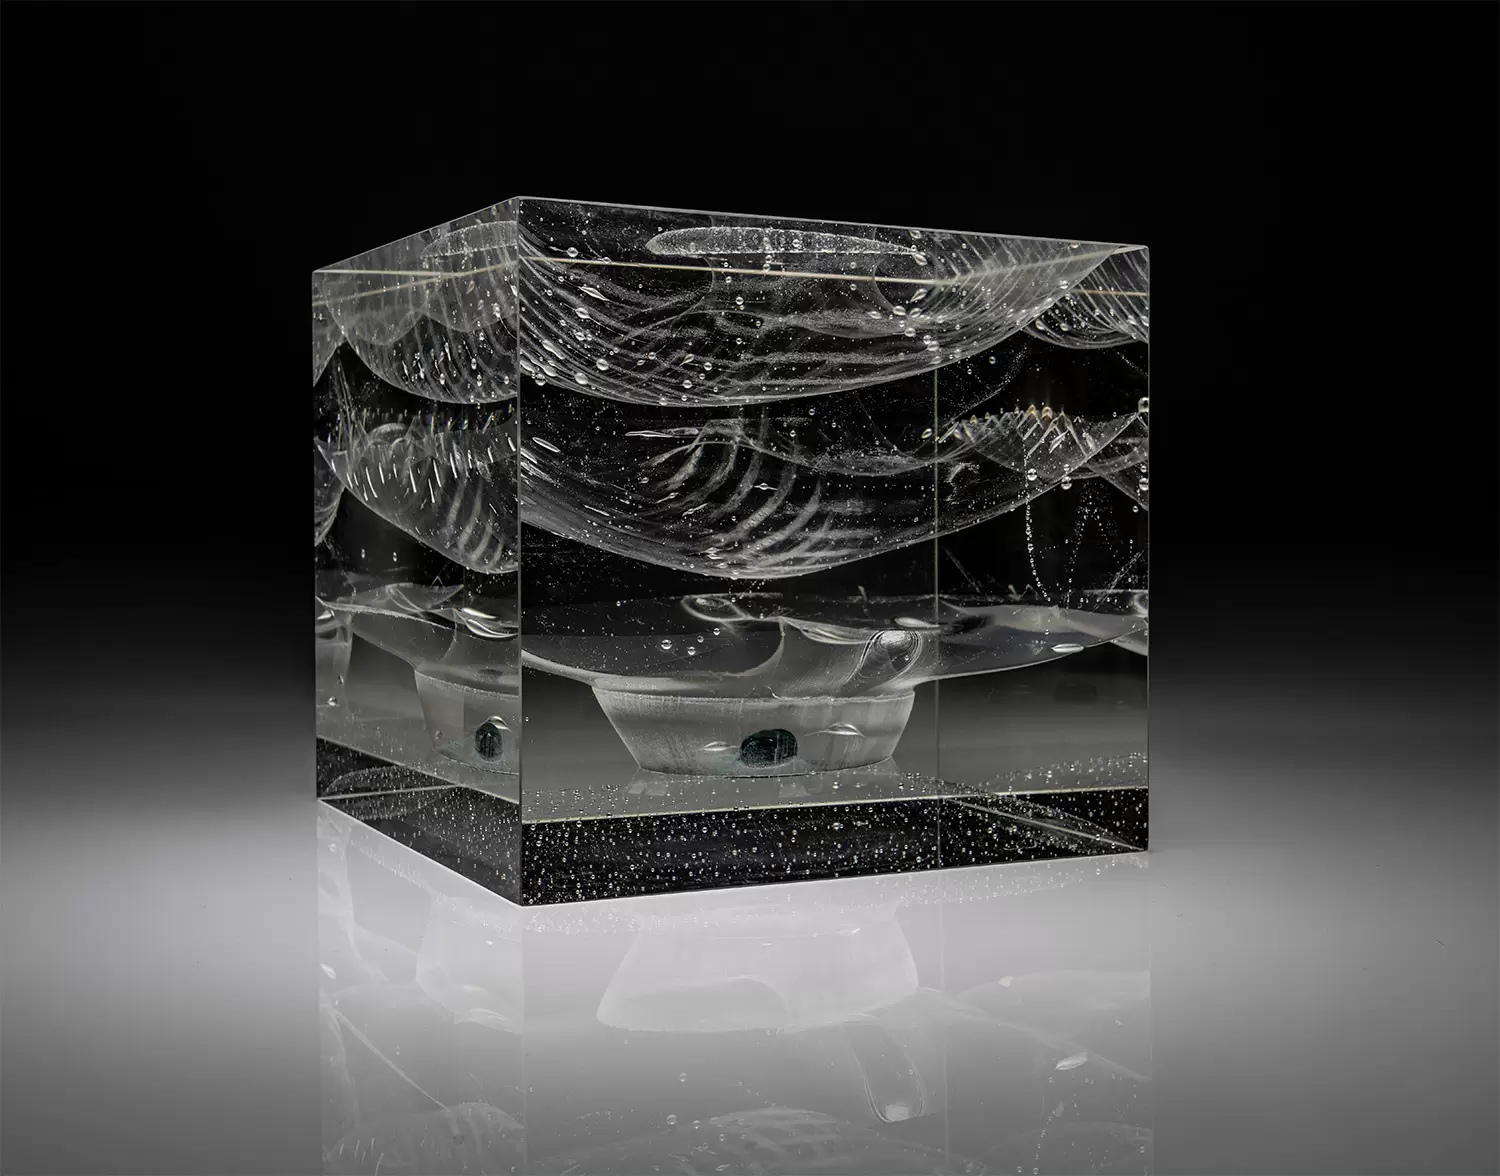 Embryo crystal glass sculpture